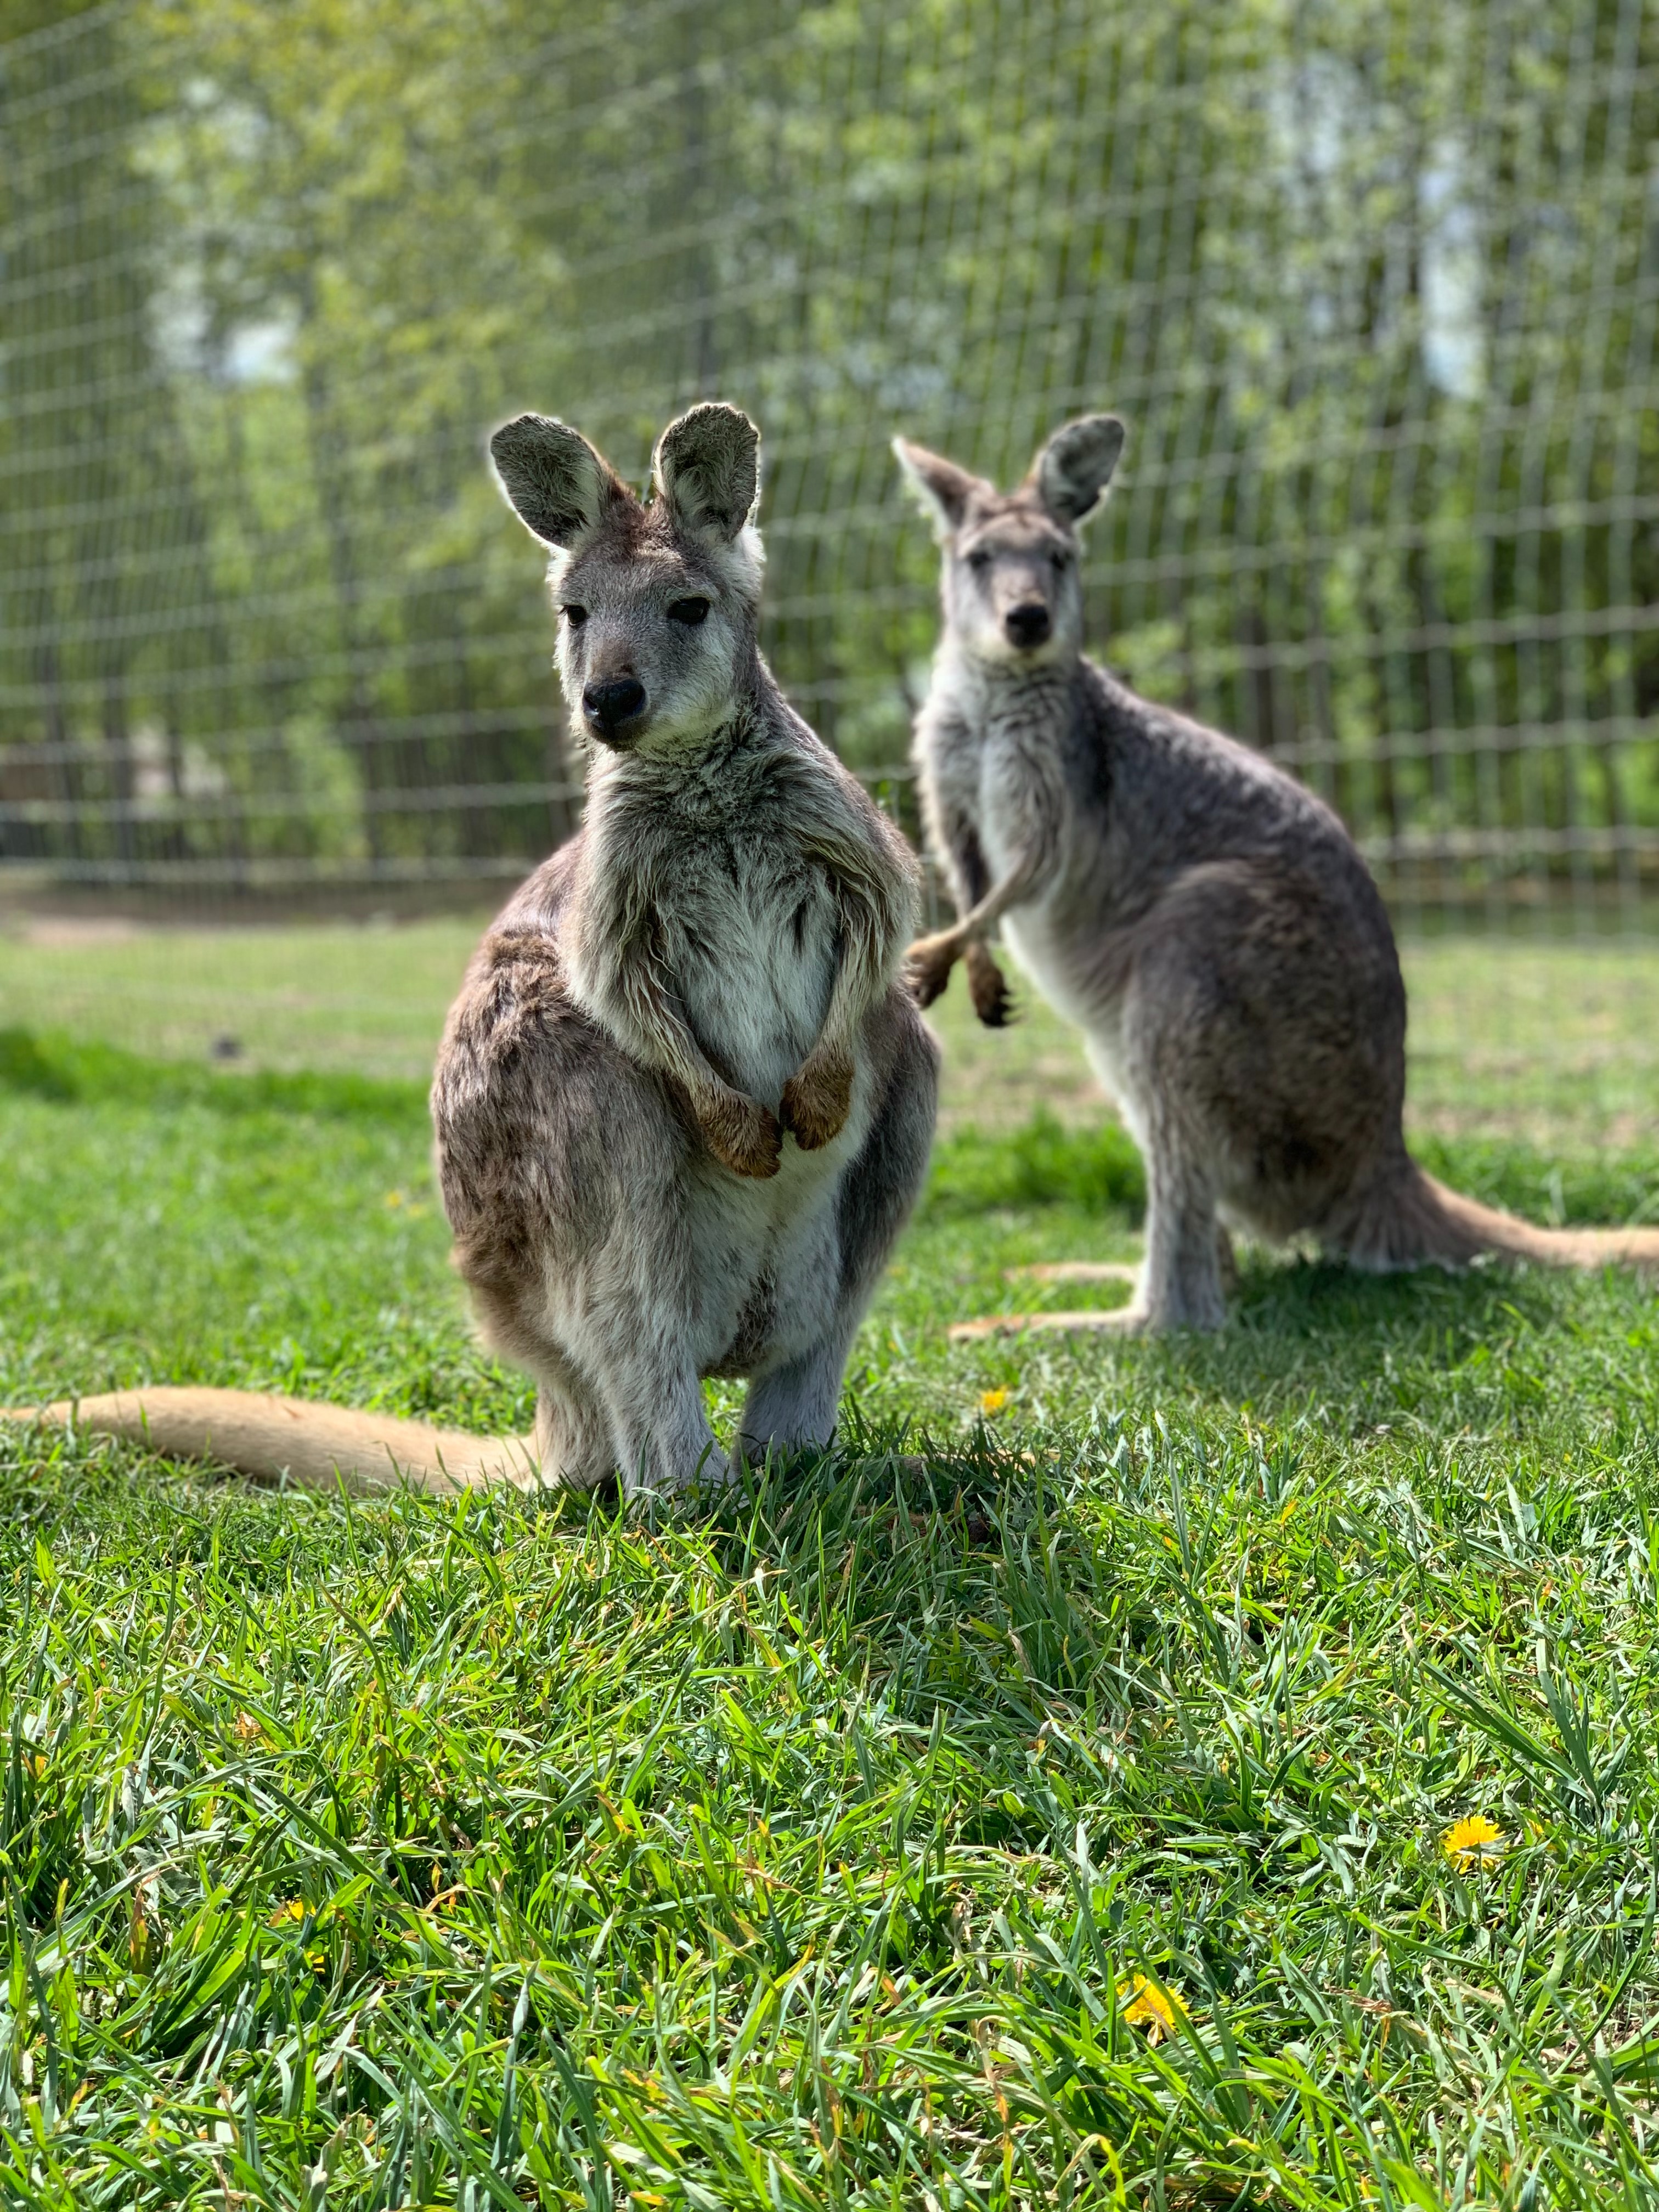 Two kangaroos standing still, not quite side by side, looking toward the camera.